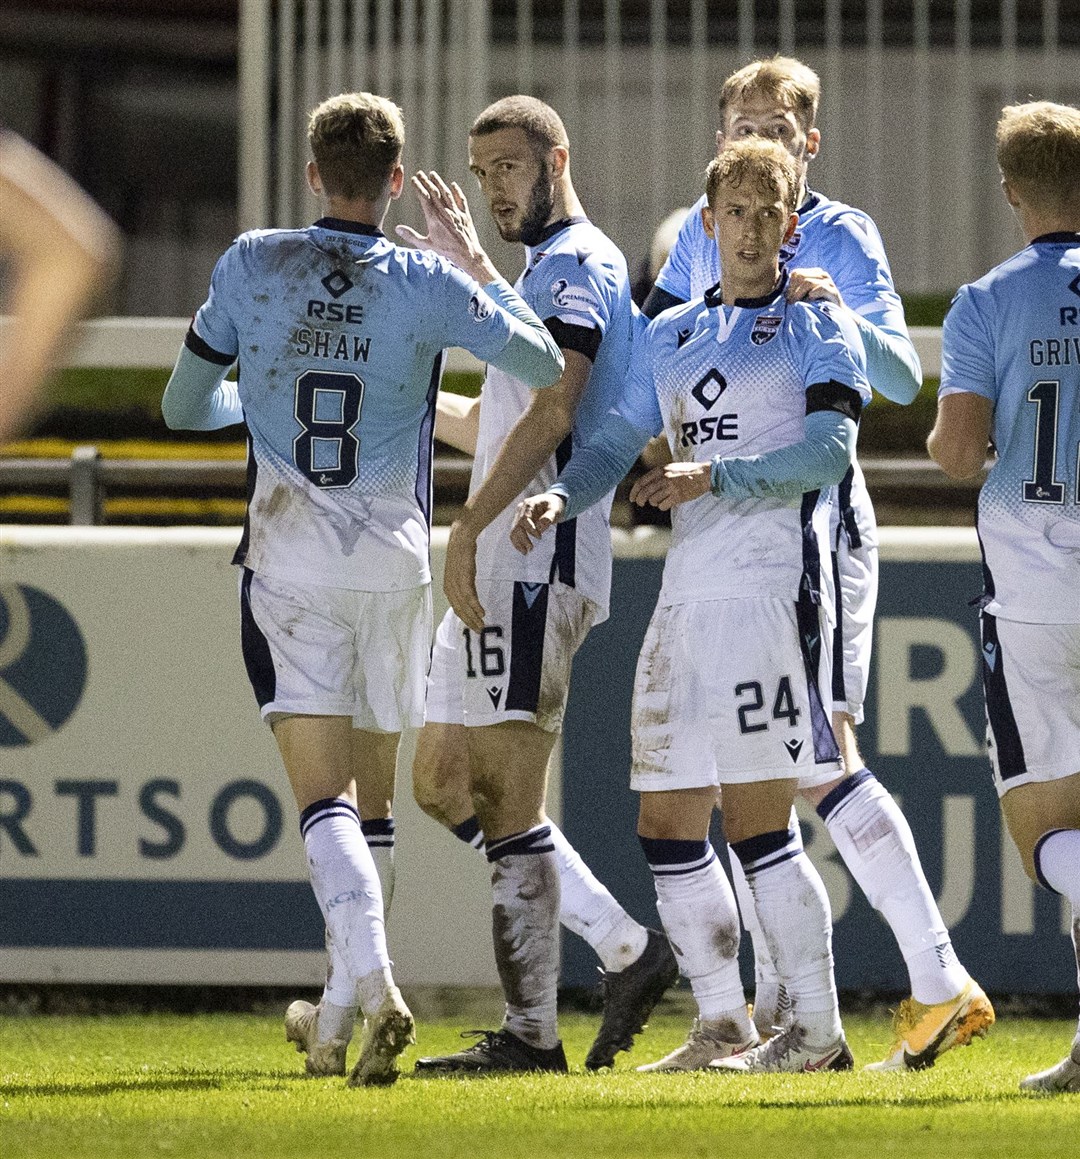 Ross County beat Celtic 2-0 to reach the quarter finals.